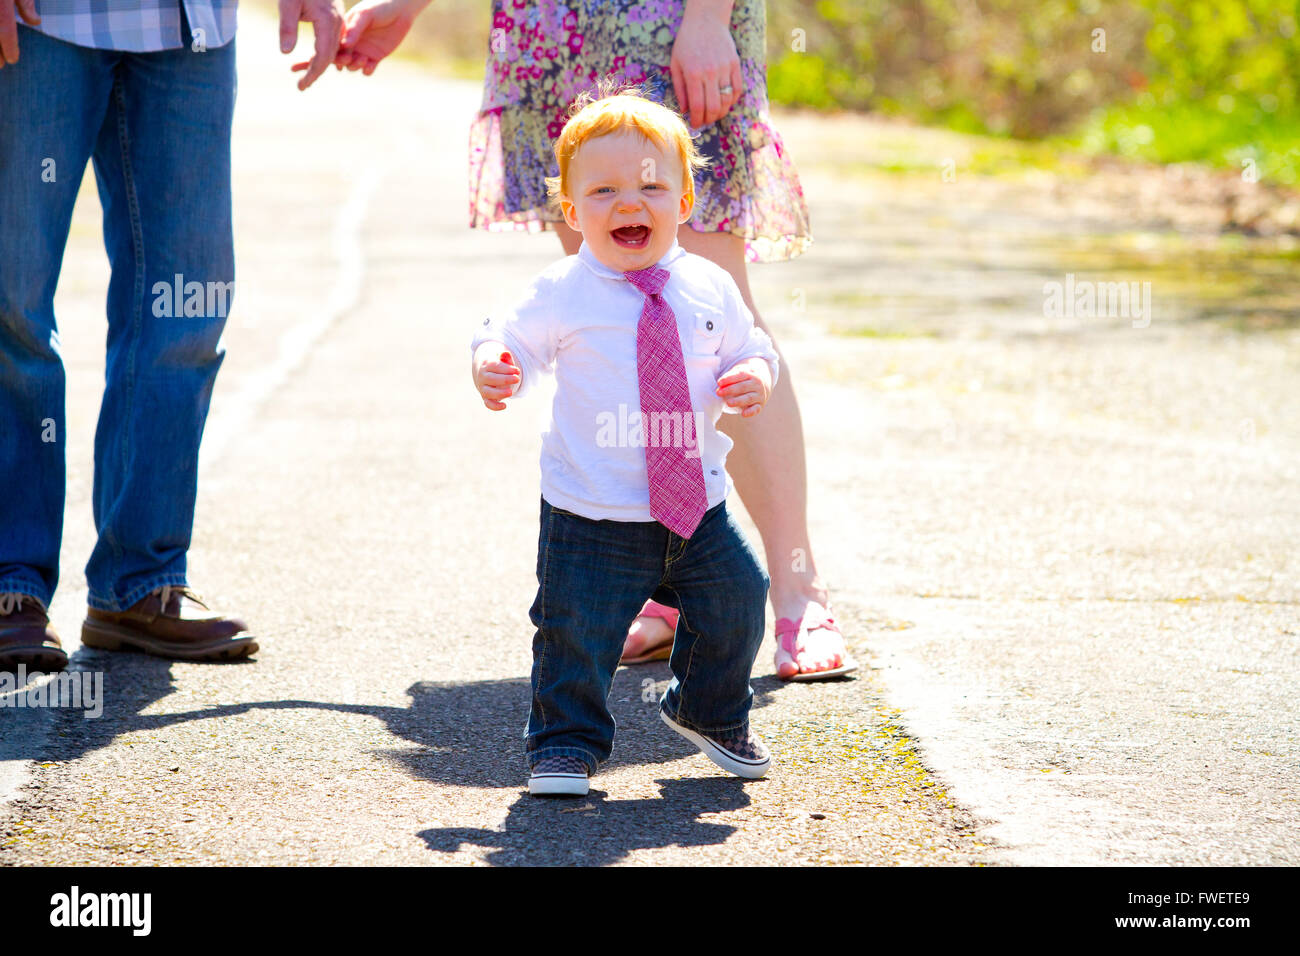 A baby boy runs away from his parents during an outdoor photo shoot with the family. Stock Photo